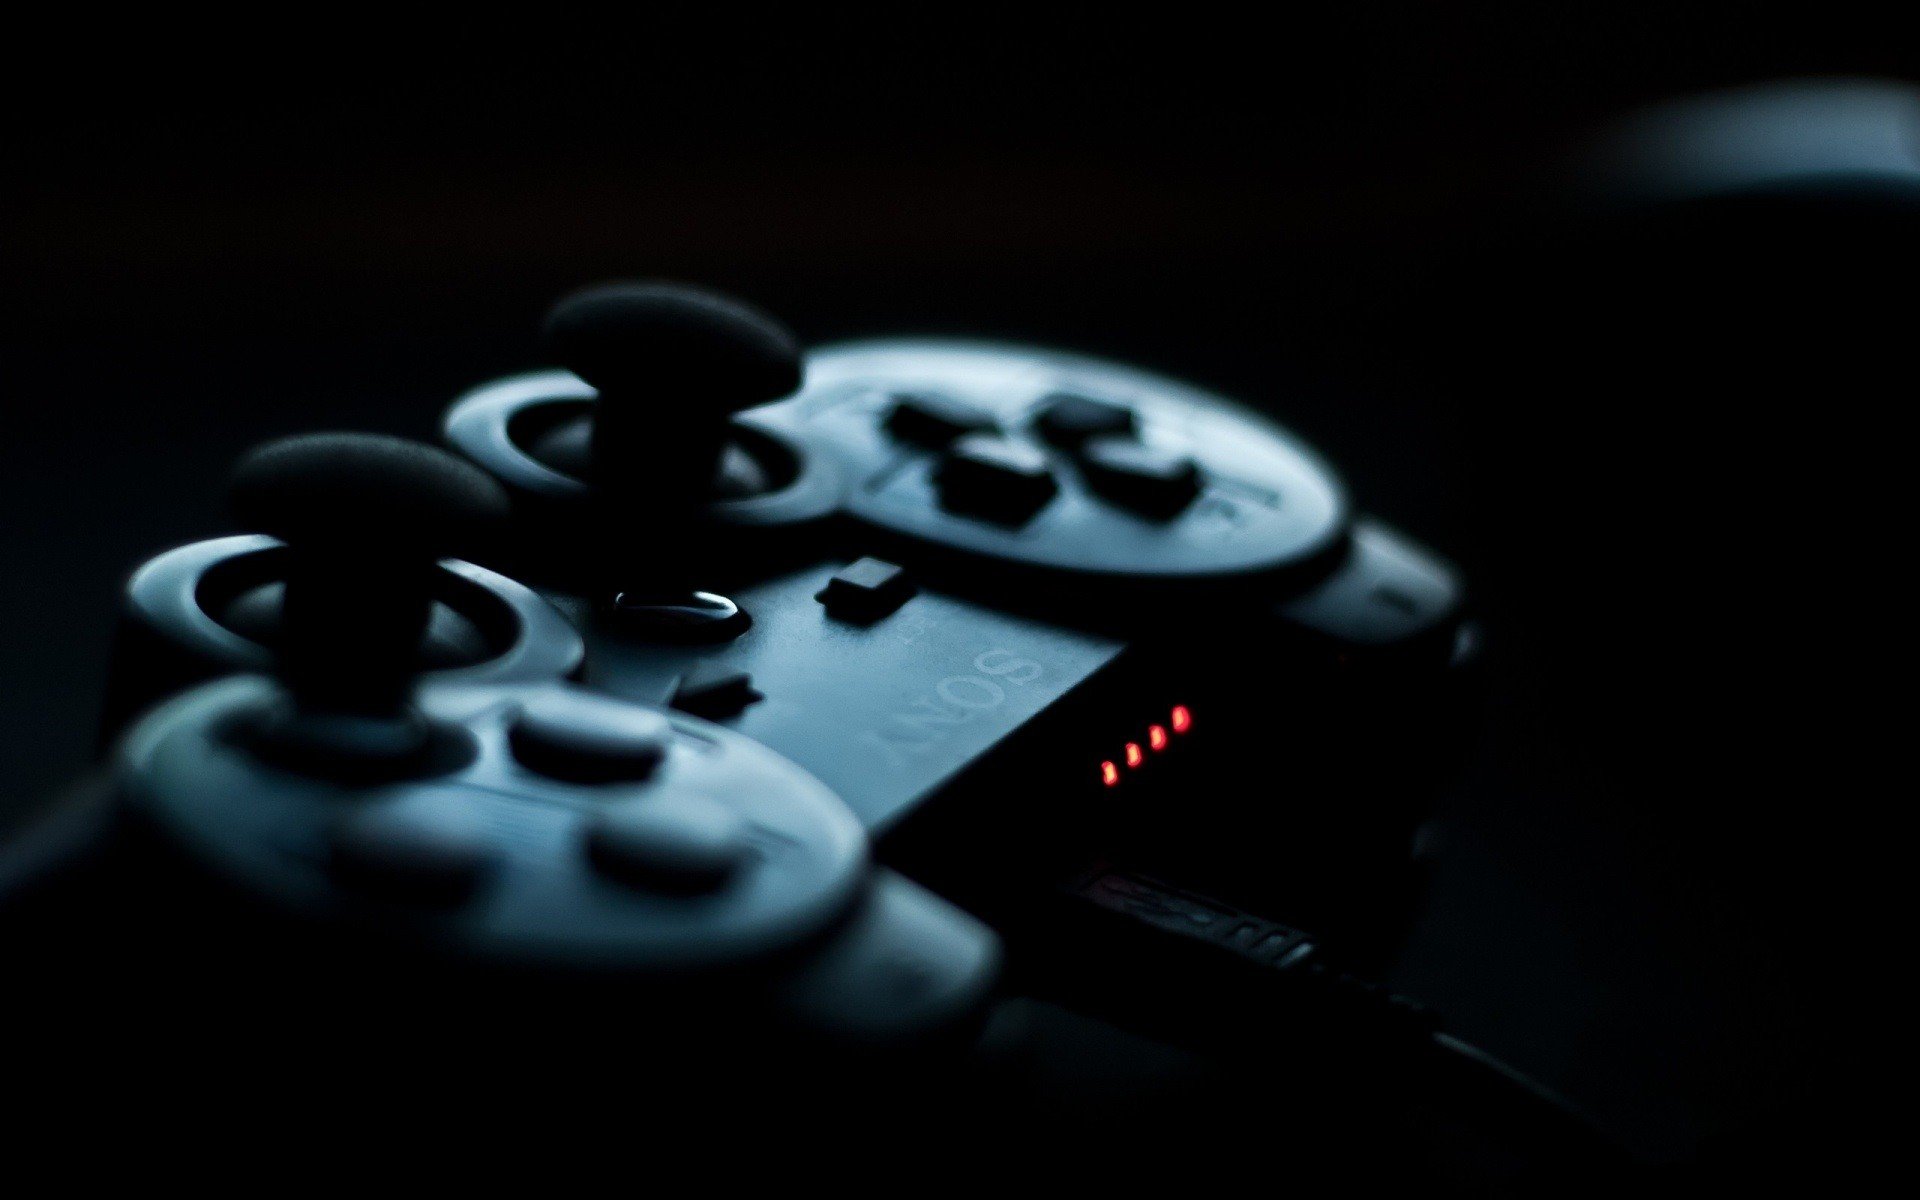 controllers, PlayStation 3, PlayStation, Sony, Black, Depth of field Wallpaper